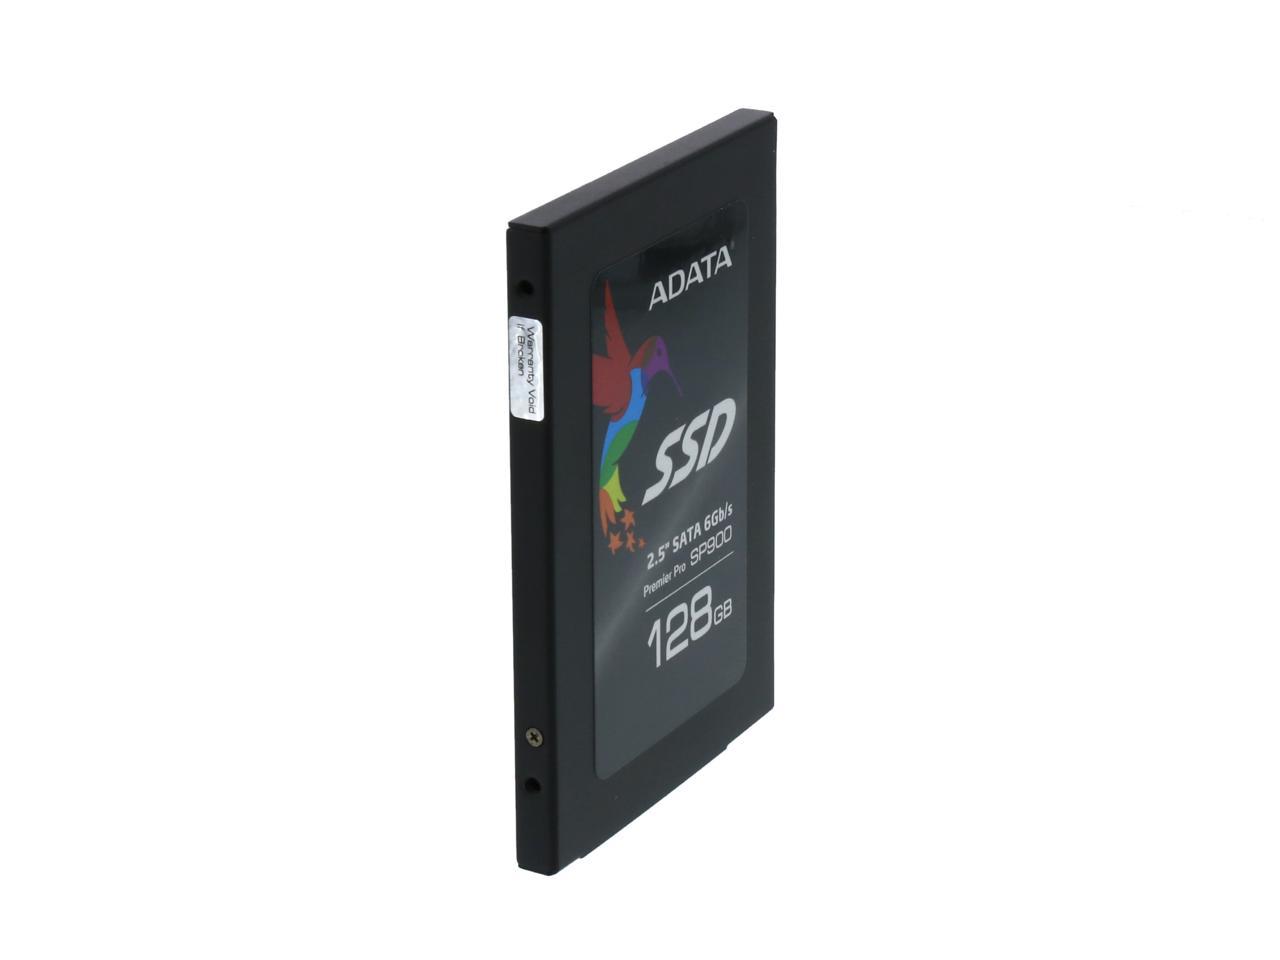 Countryside Induce Therefore ADATA Premier Pro SP900 2.5" 128GB SATA III MLC Internal Solid State Drive ( SSD) ASP900S3-128GM-C - Newegg.com